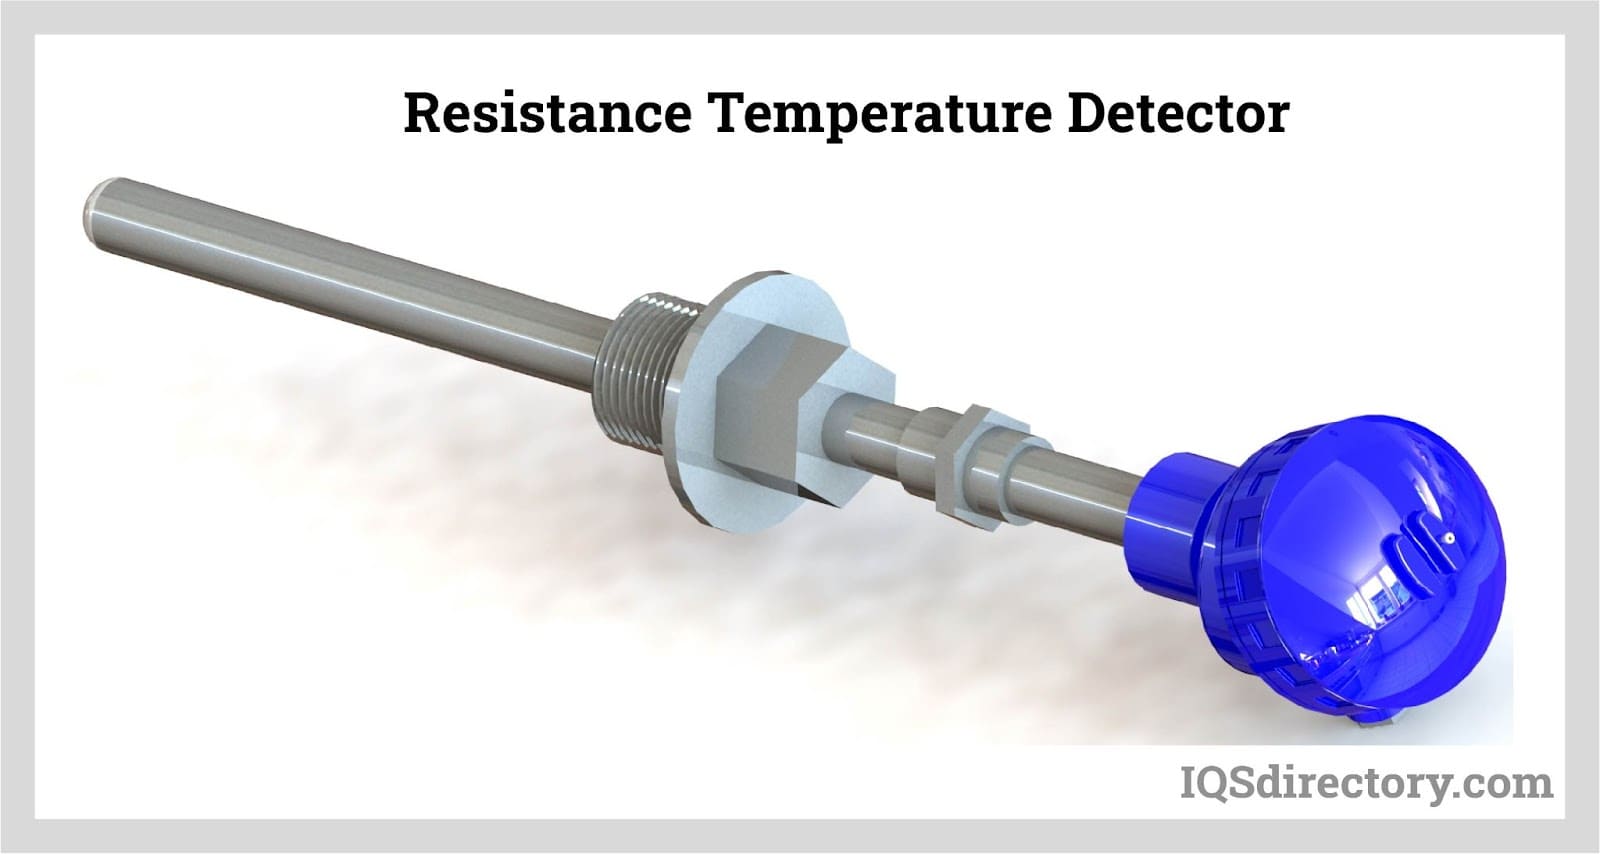 Resistance Temperature Detectors: Their Uses, Types, and Other FAQs